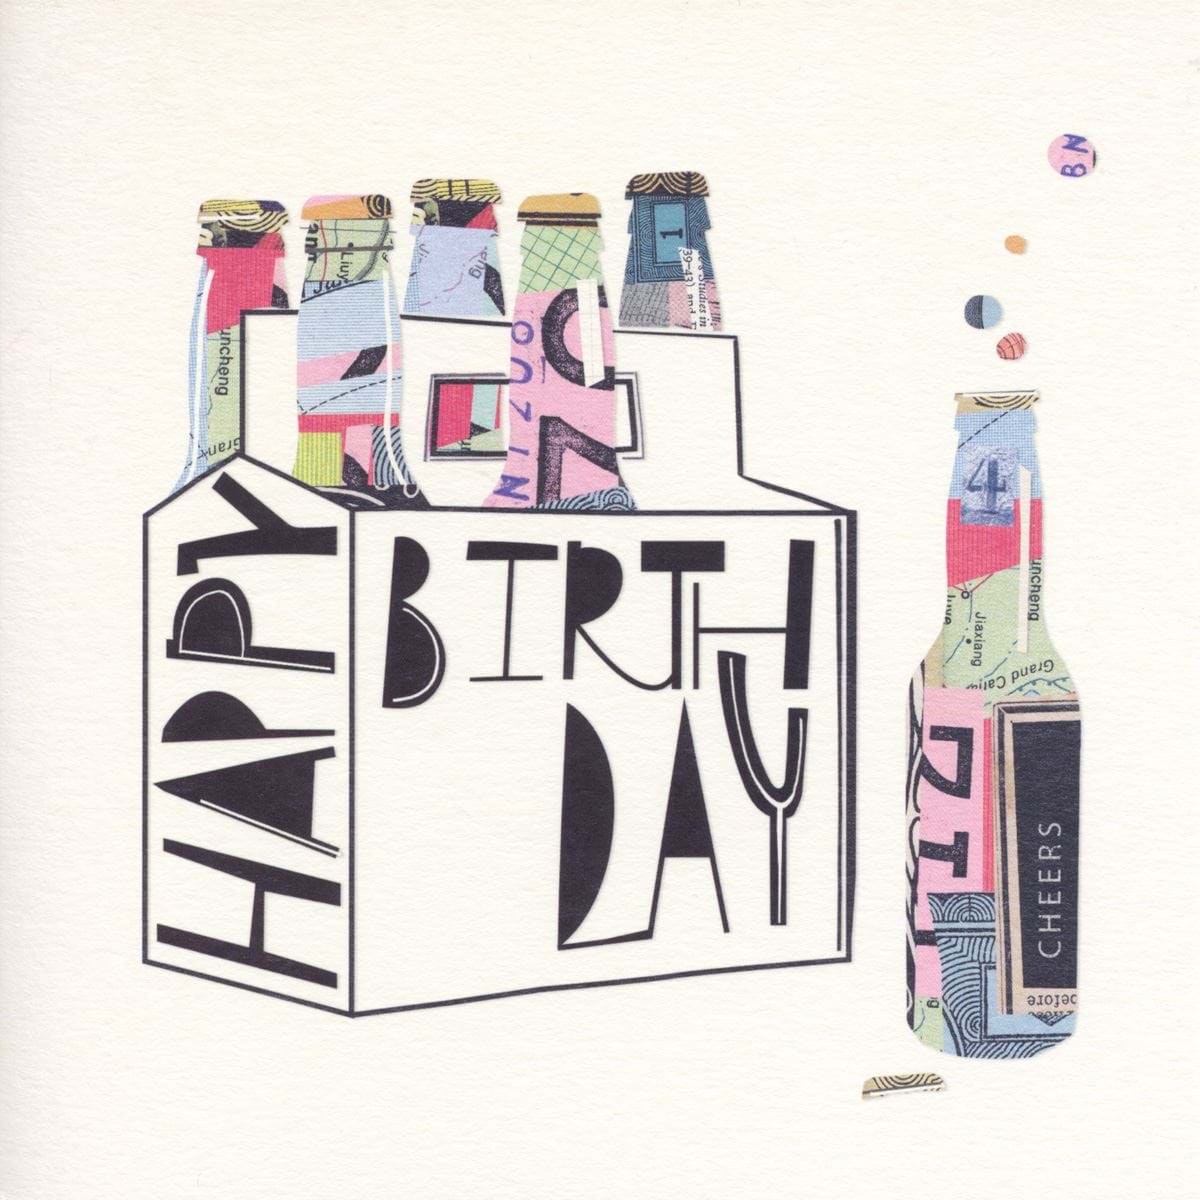 Crate of Beers Birthday Card